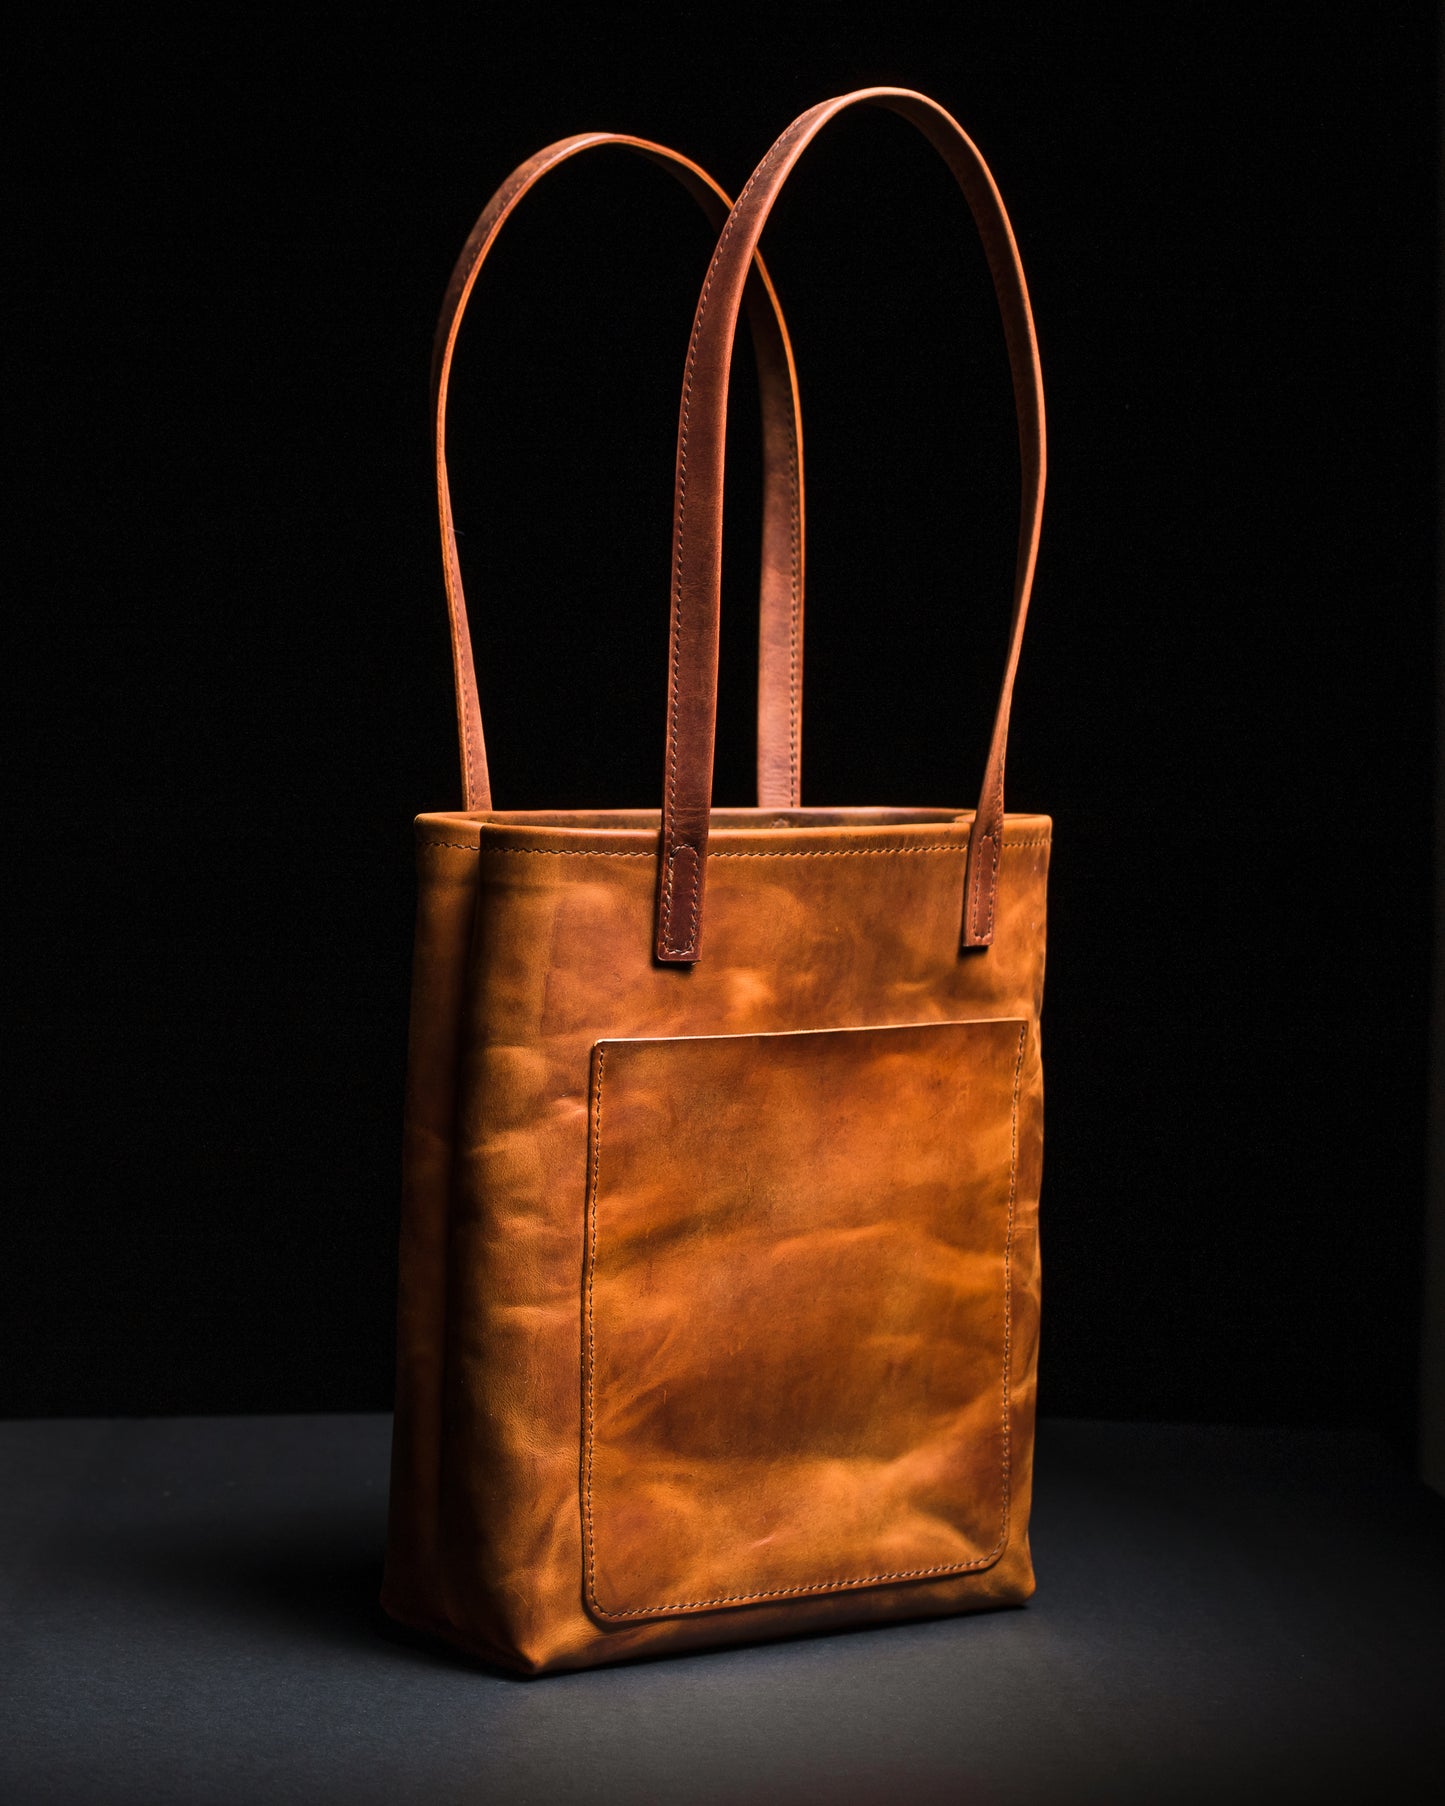 Unisex Leather Tote Bag by Grubble